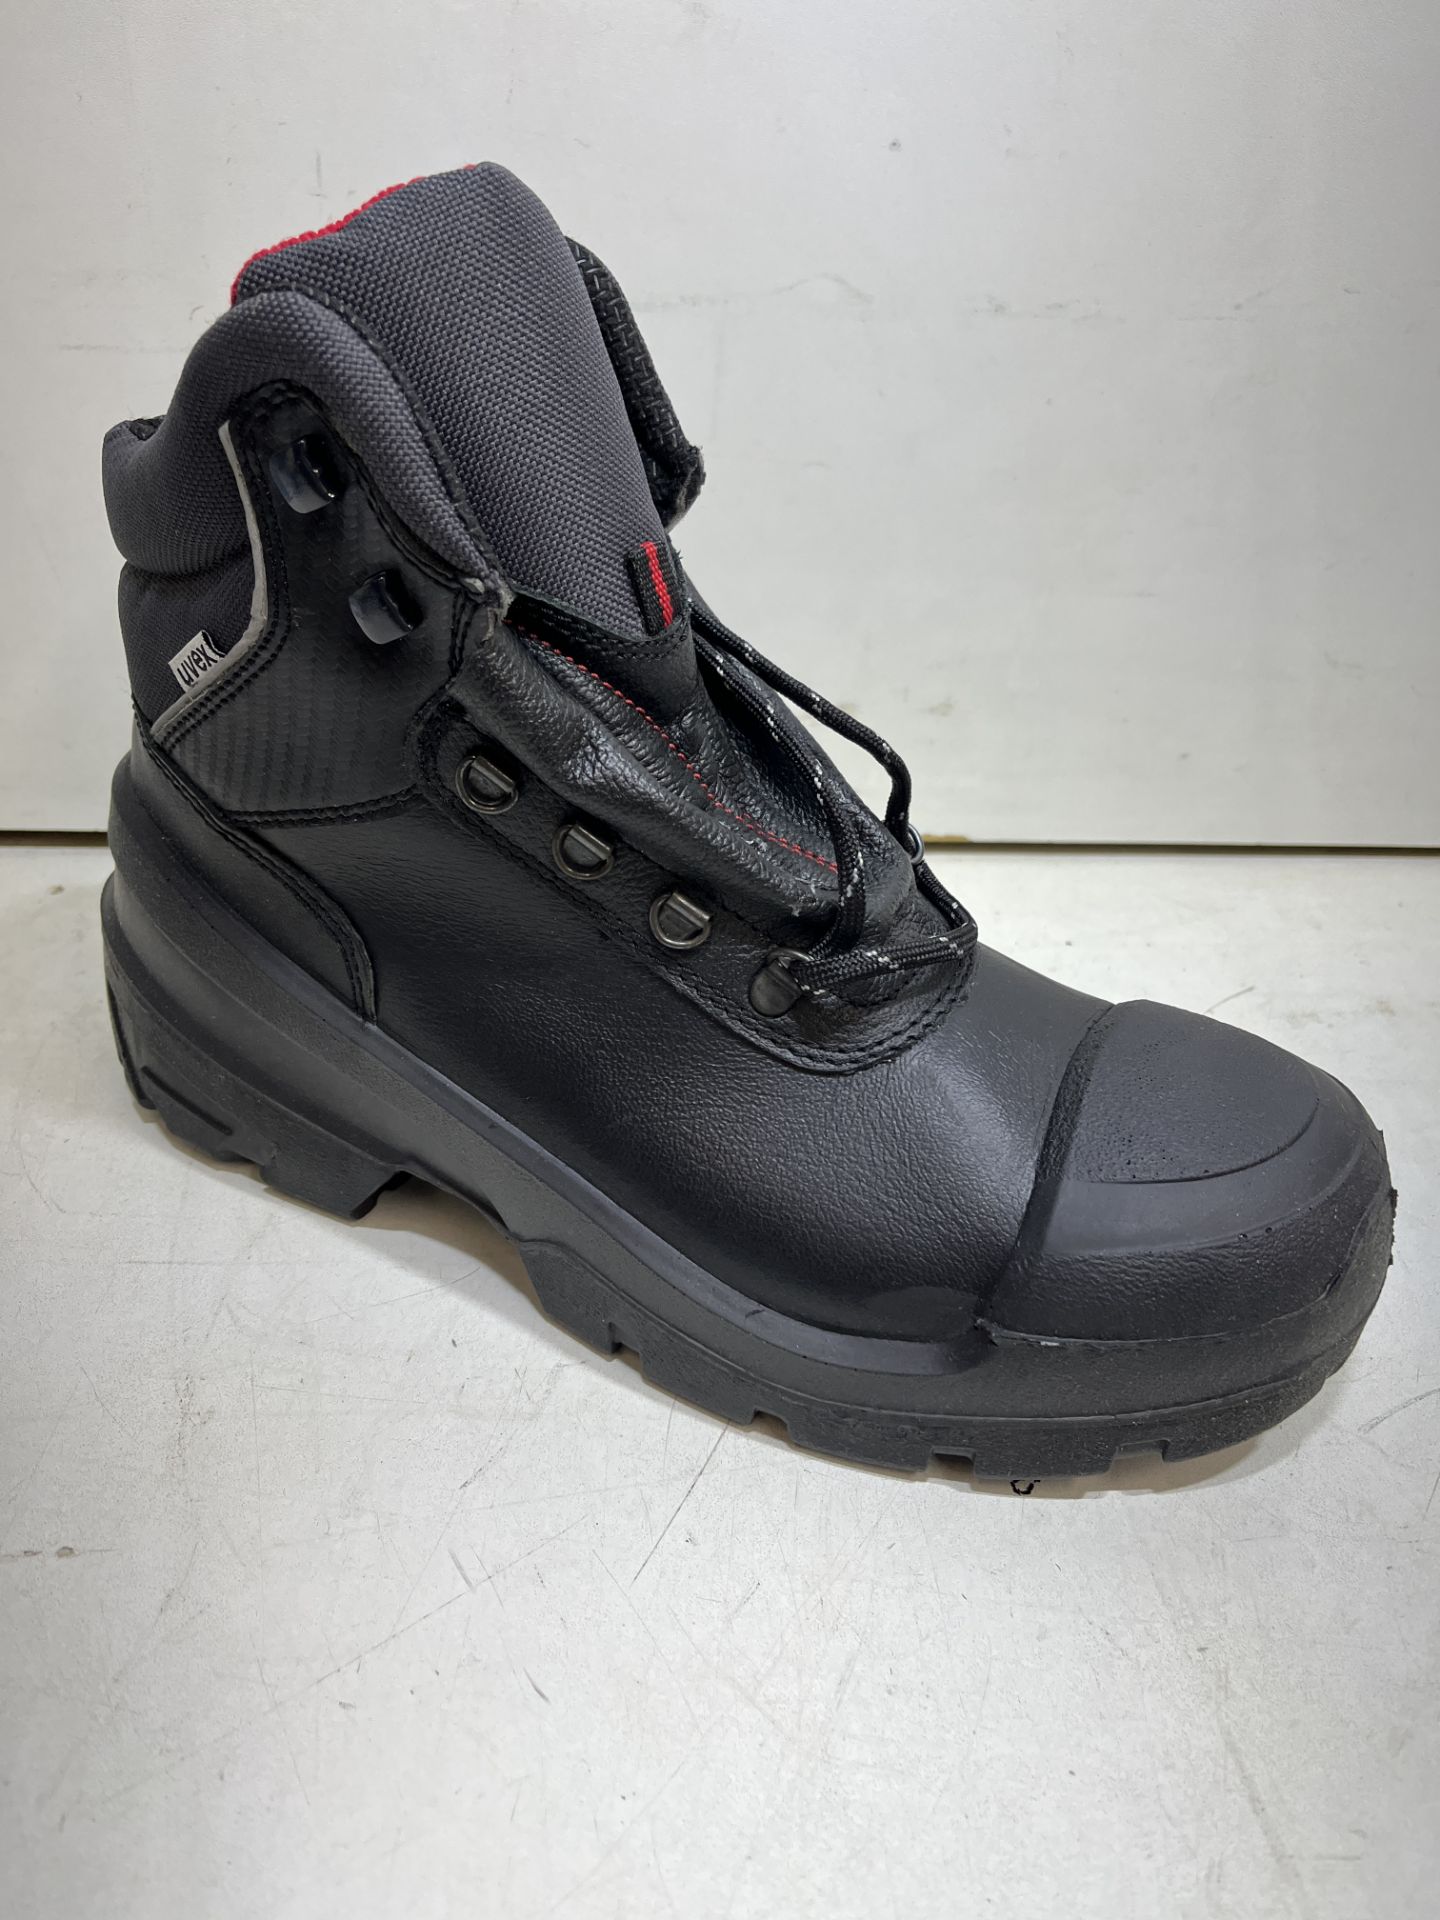 Uvex Safety Boots | UK 9